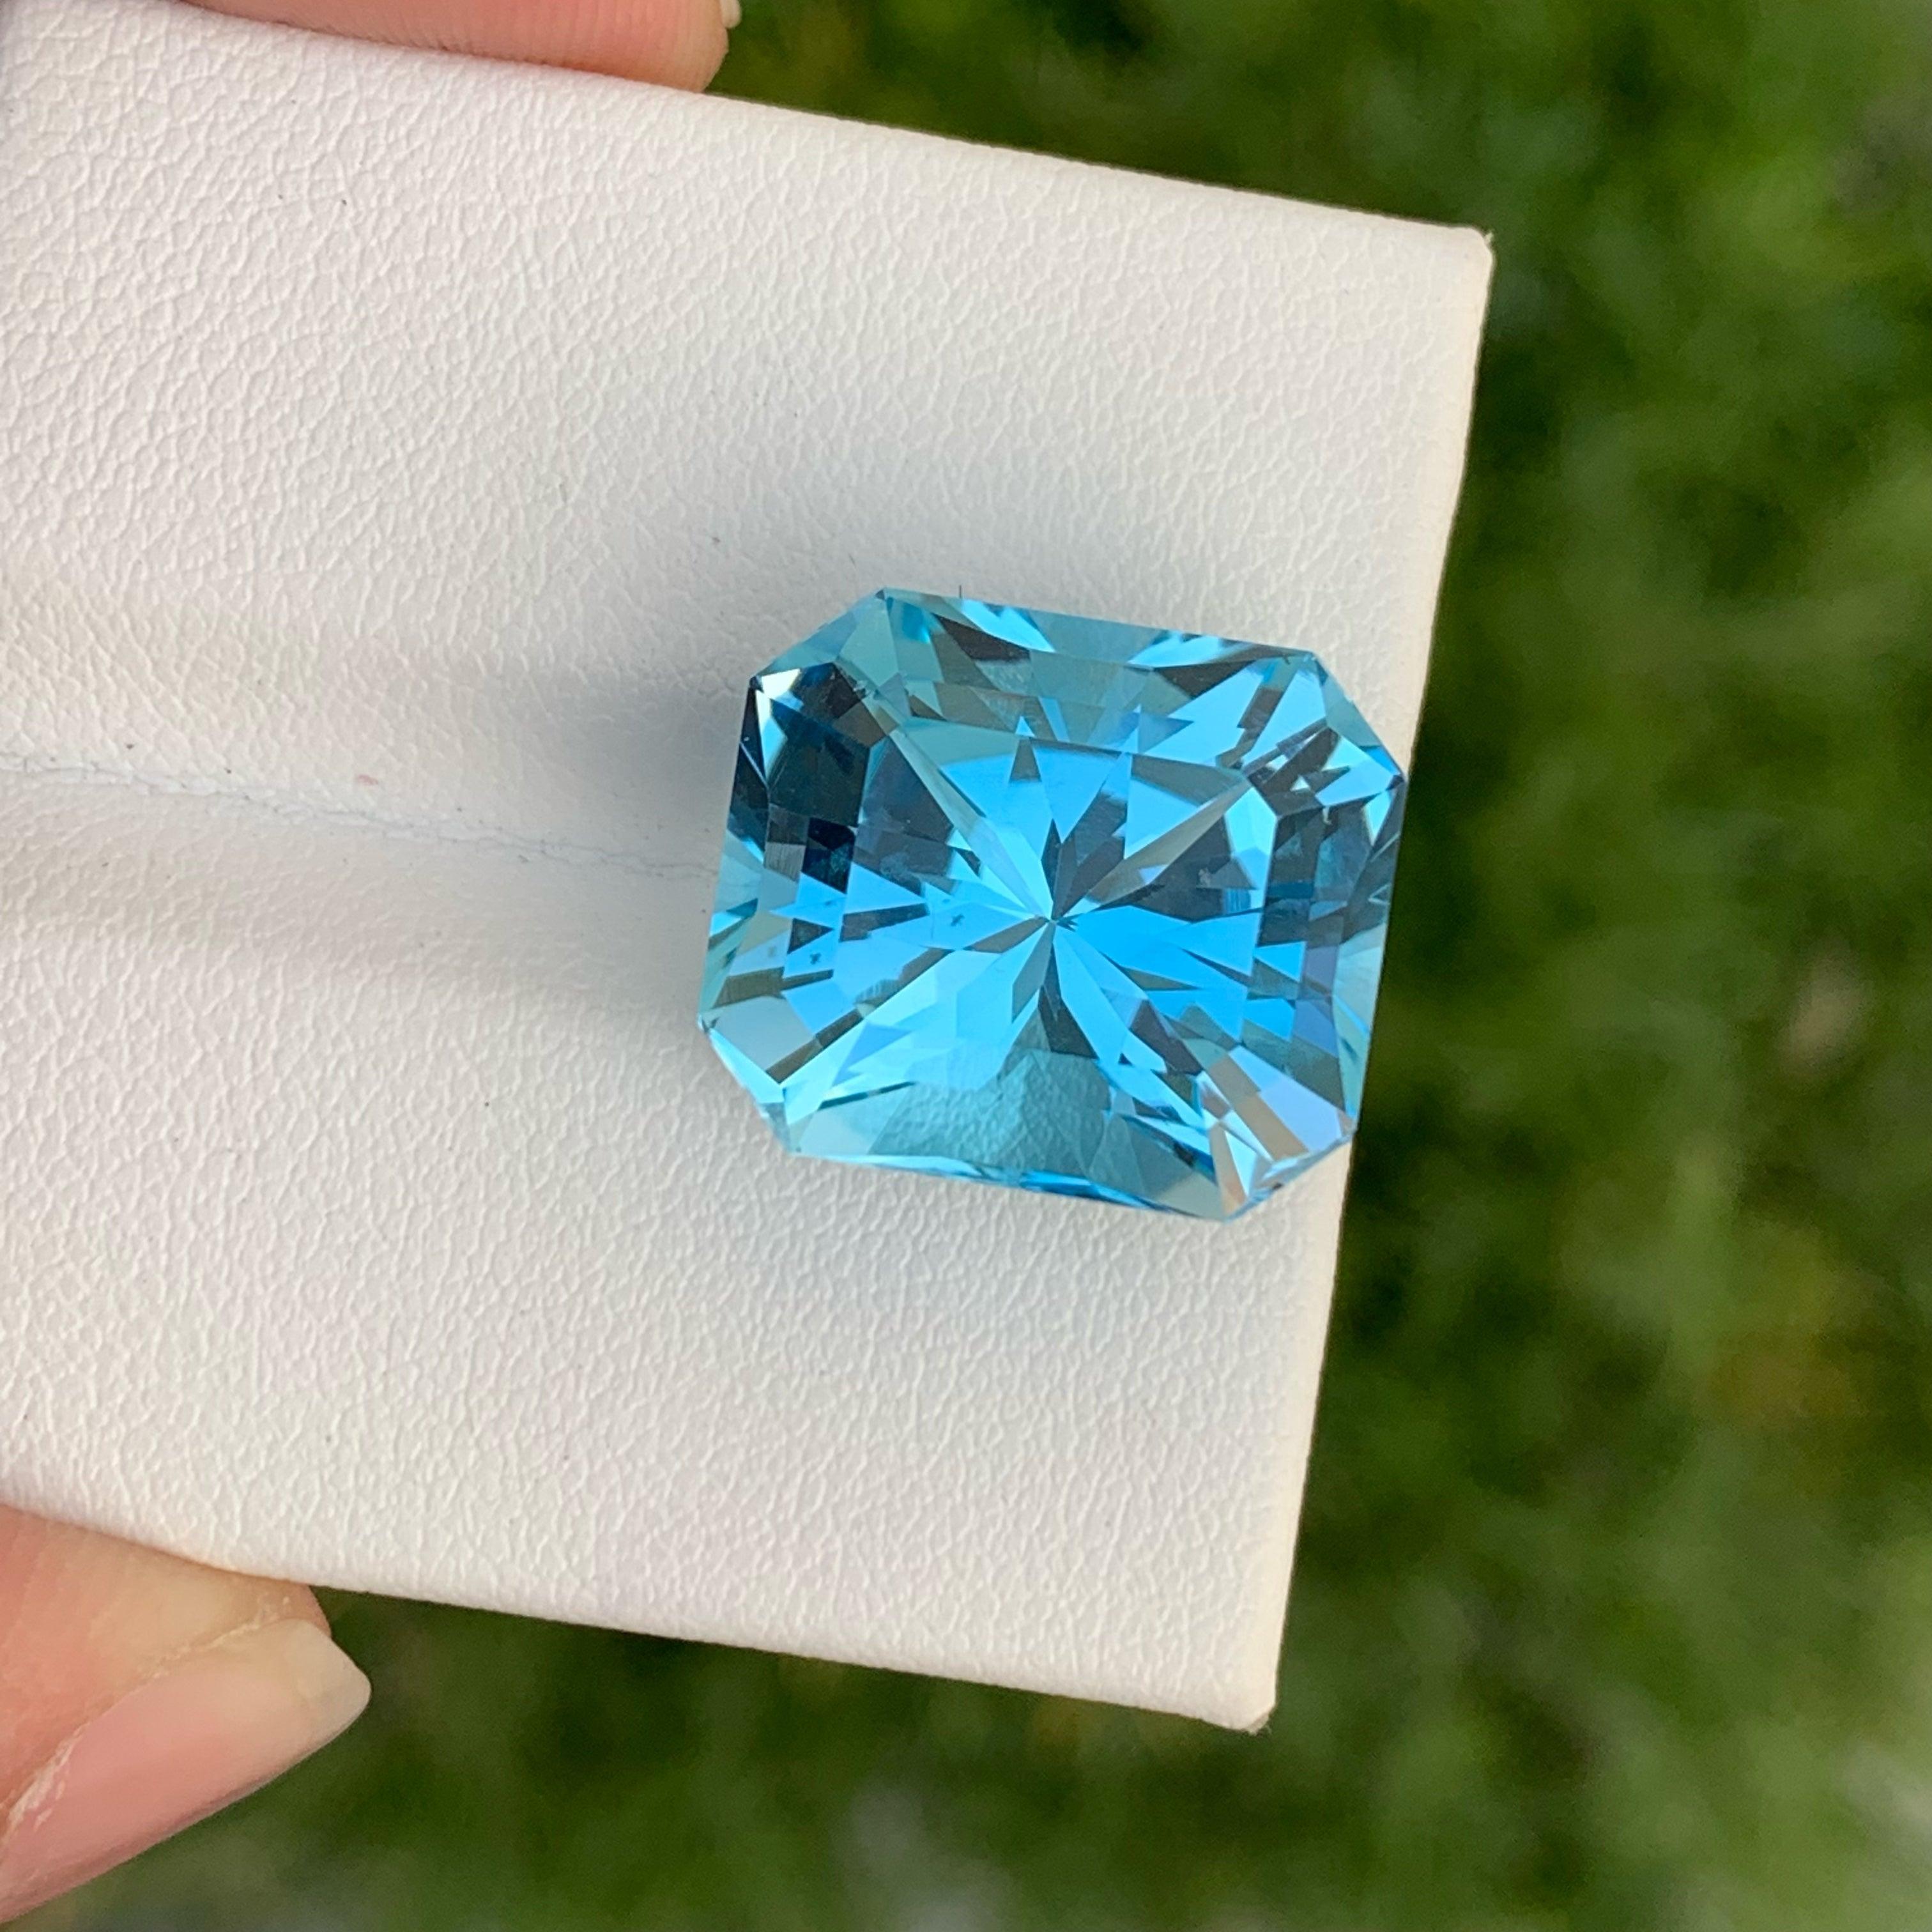 Radiantly Swiss Blue Topaz Gemstone, available For Sale At Wholesale Price Natural High Quality 24.65 Carats Loupe Clean Clarity Natural Loose Topaz From Madagascar. 
Product Information:
GEMSTONE NAME: Radiantly Swiss Blue Topaz